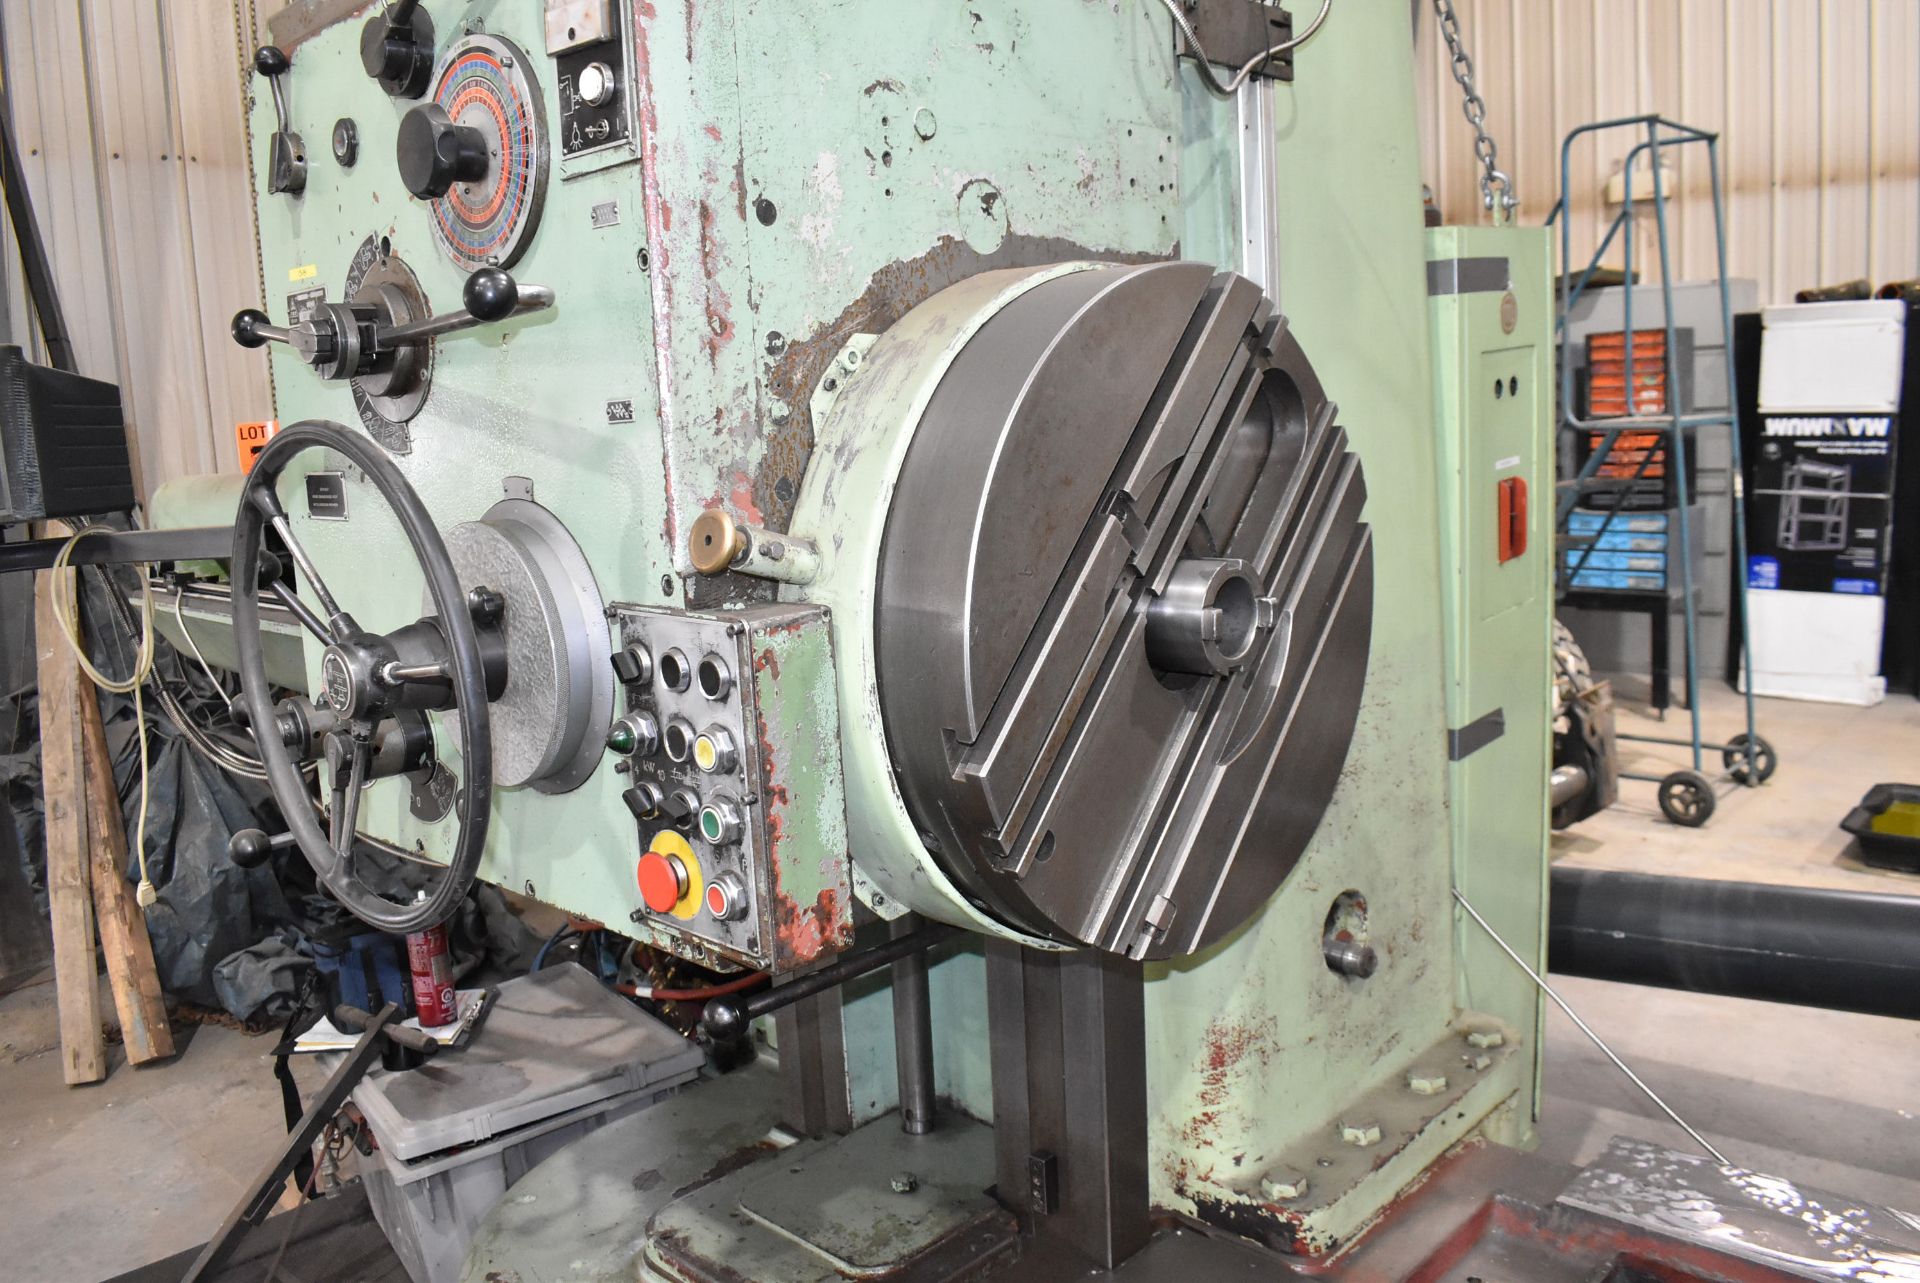 TOS VARNSDORF W100A TABLE TYPE HORIZONTAL BORING MILL WITH 4" SPINDLE, 49.2" X 49.2" ROTARY POWER - Image 8 of 19